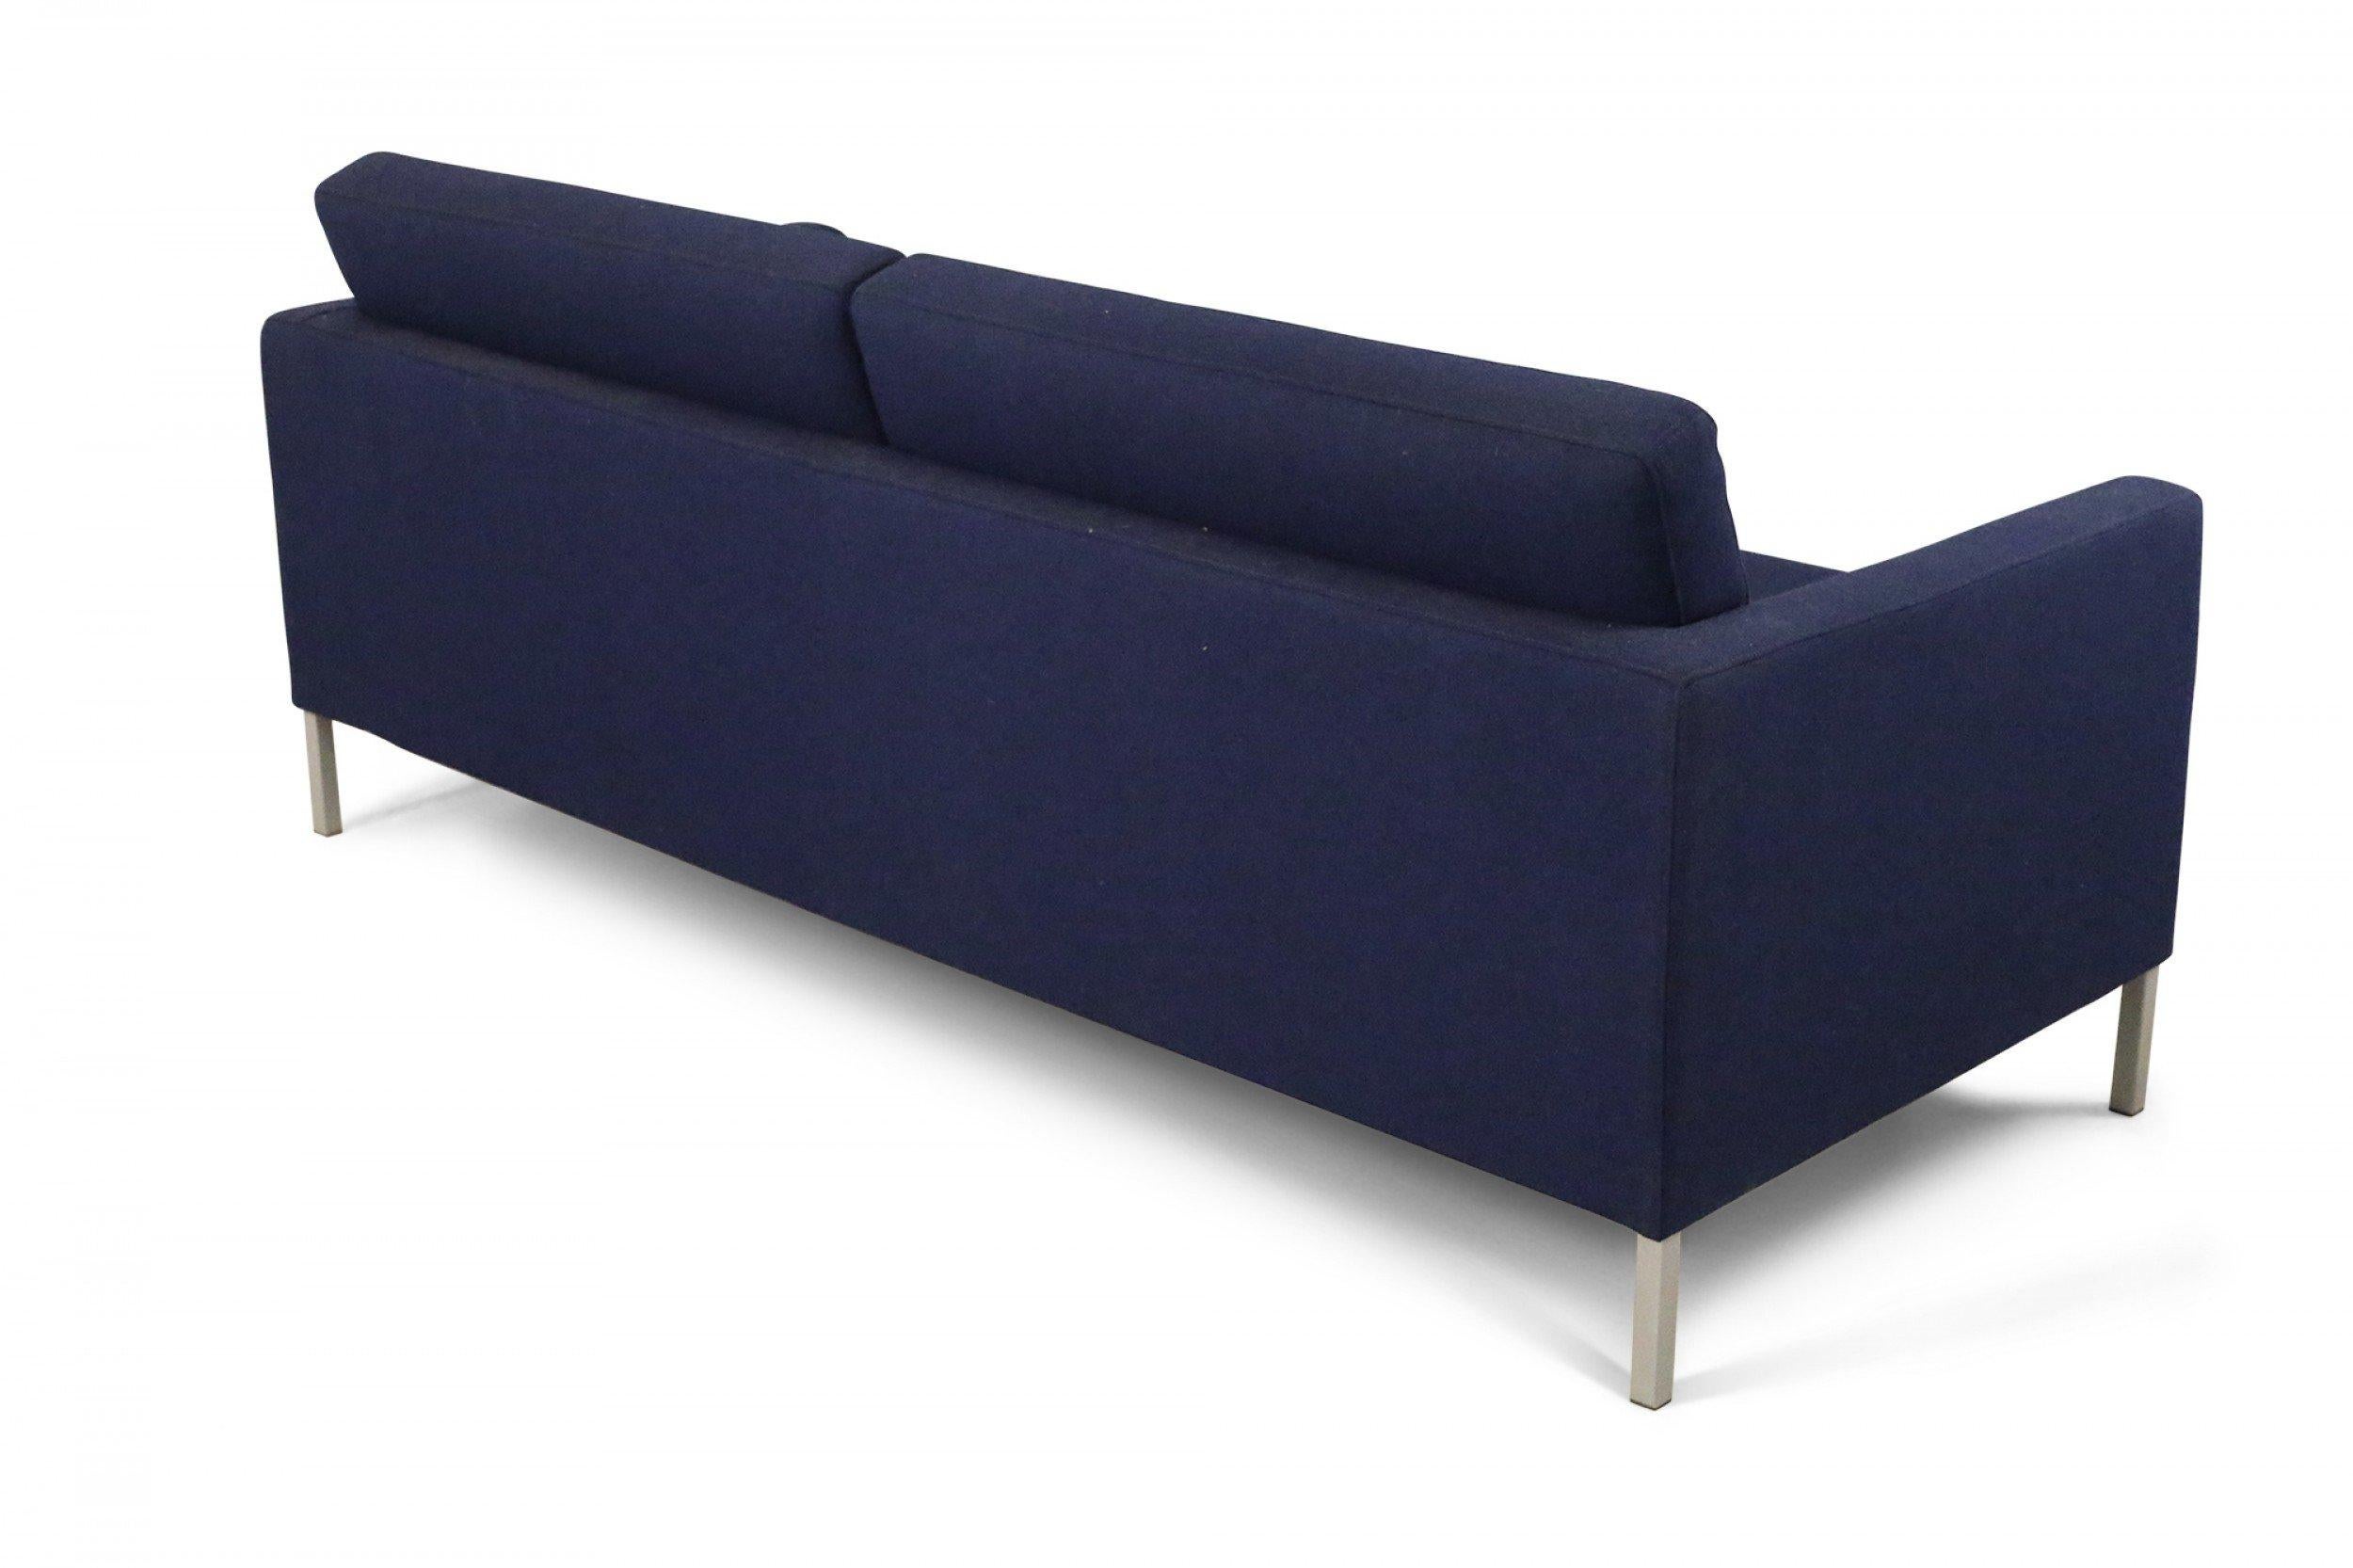 American Contemporary Navy Blue Upholstered Three-Seat Sofa For Sale